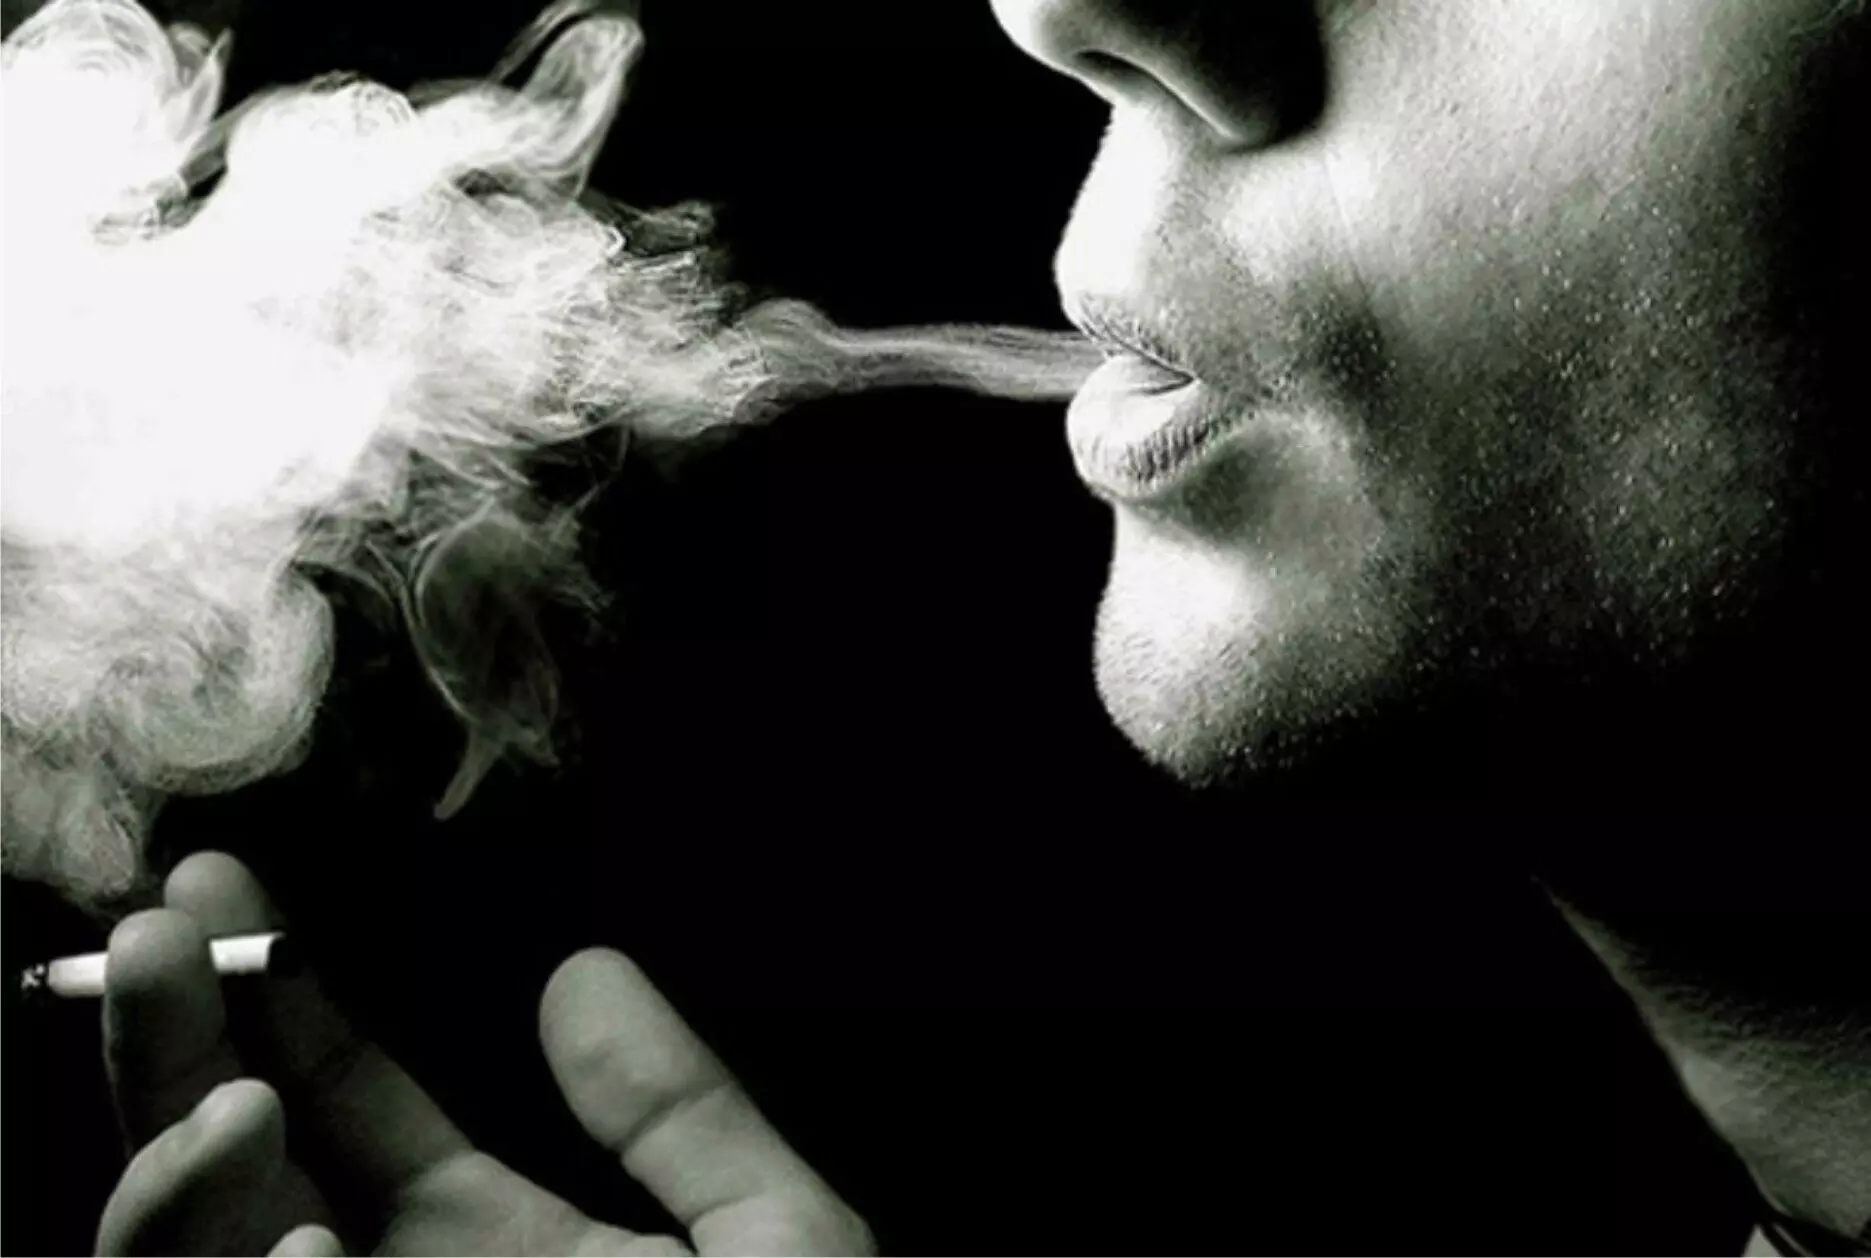 INTERESTING FACTS ABOUT SMOKING